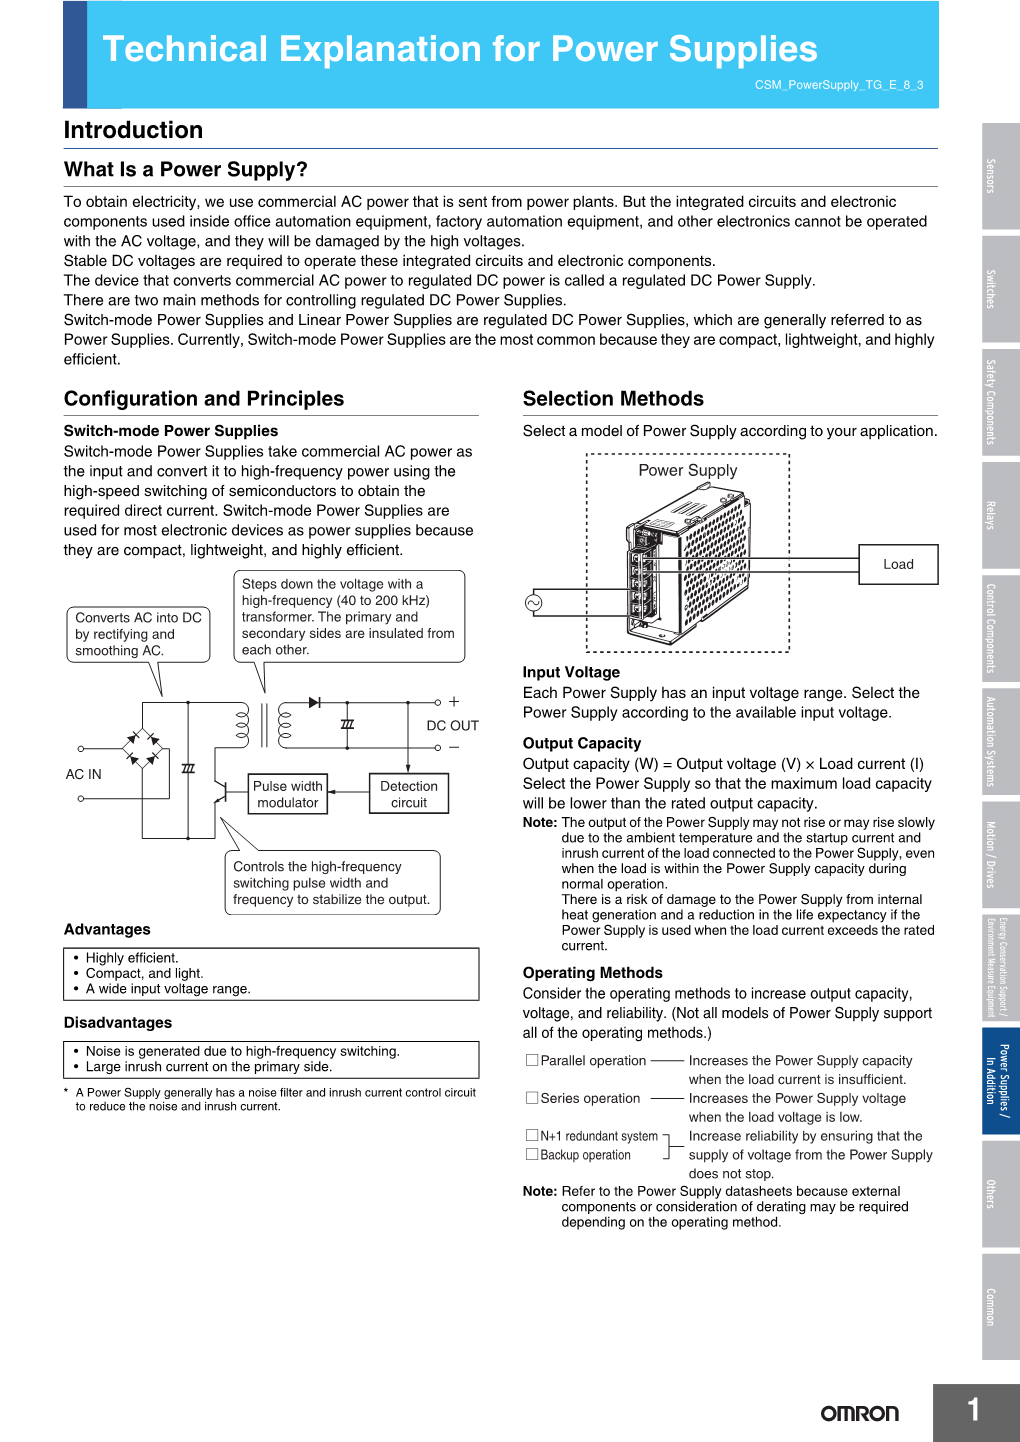 Technical Explanation for Power Supplies